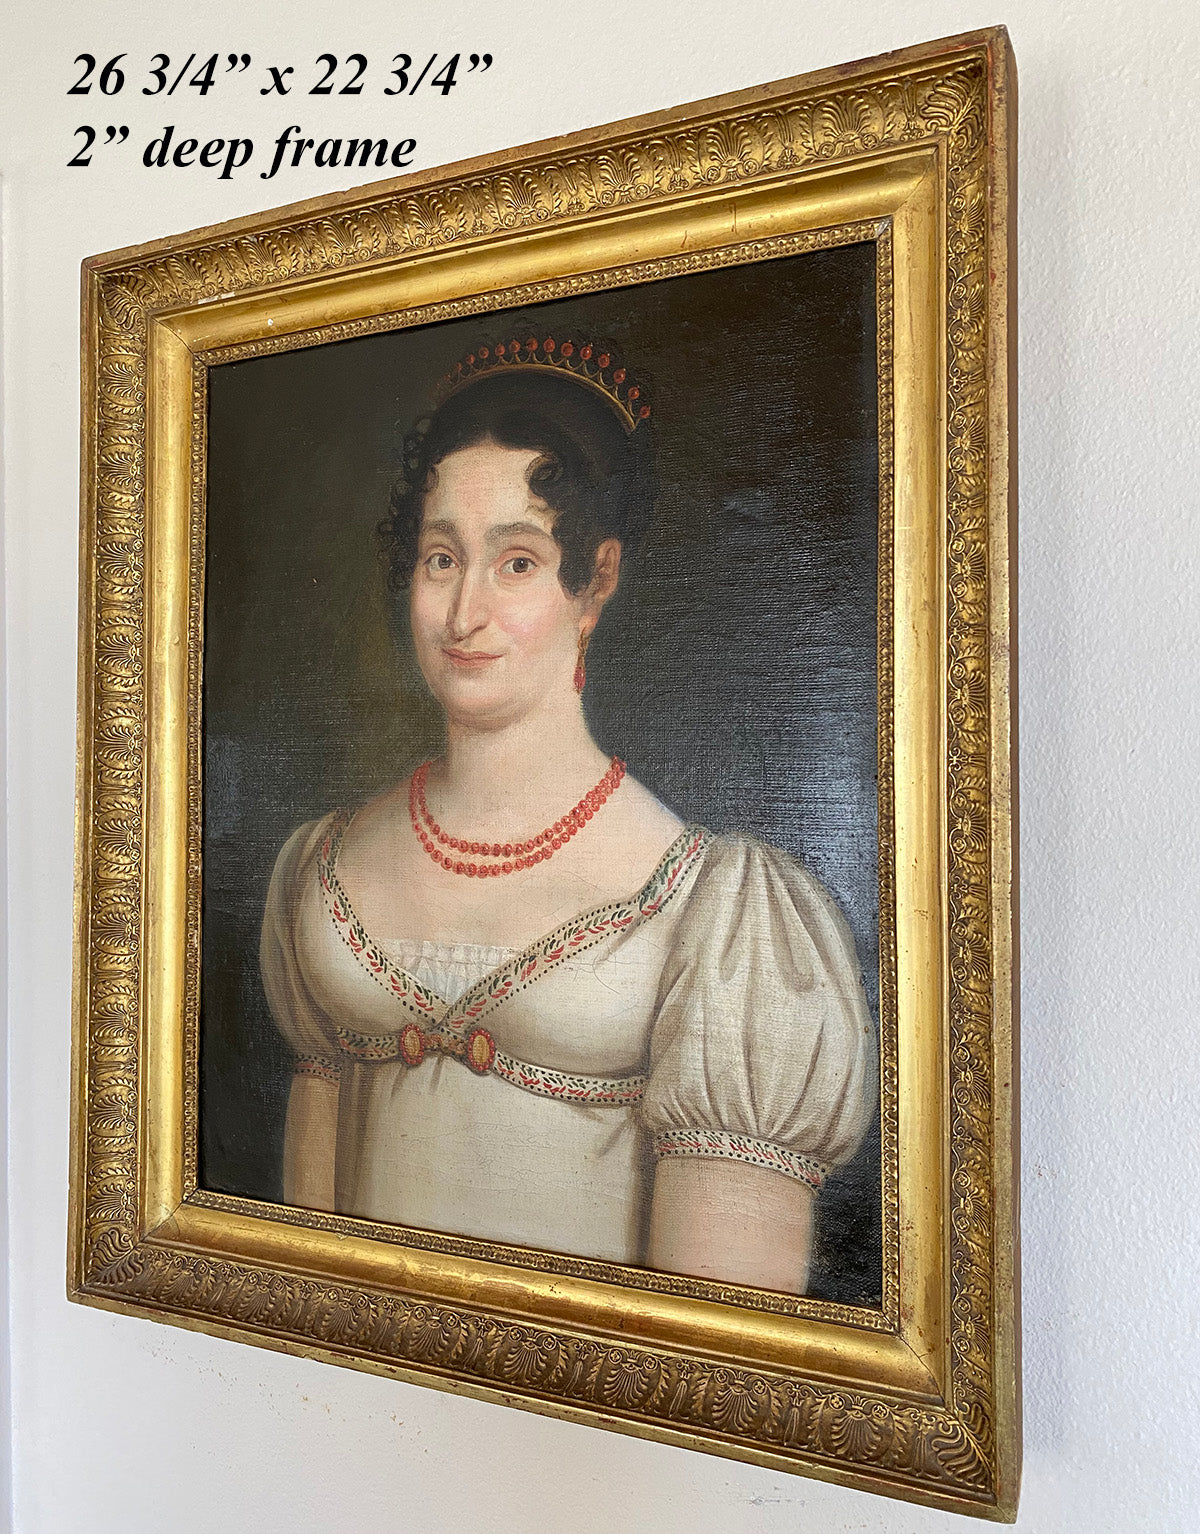 Antique French Empire Oil Painting, Portrait of Woman with Red Coral Palais Royal Jewelry, Tiara